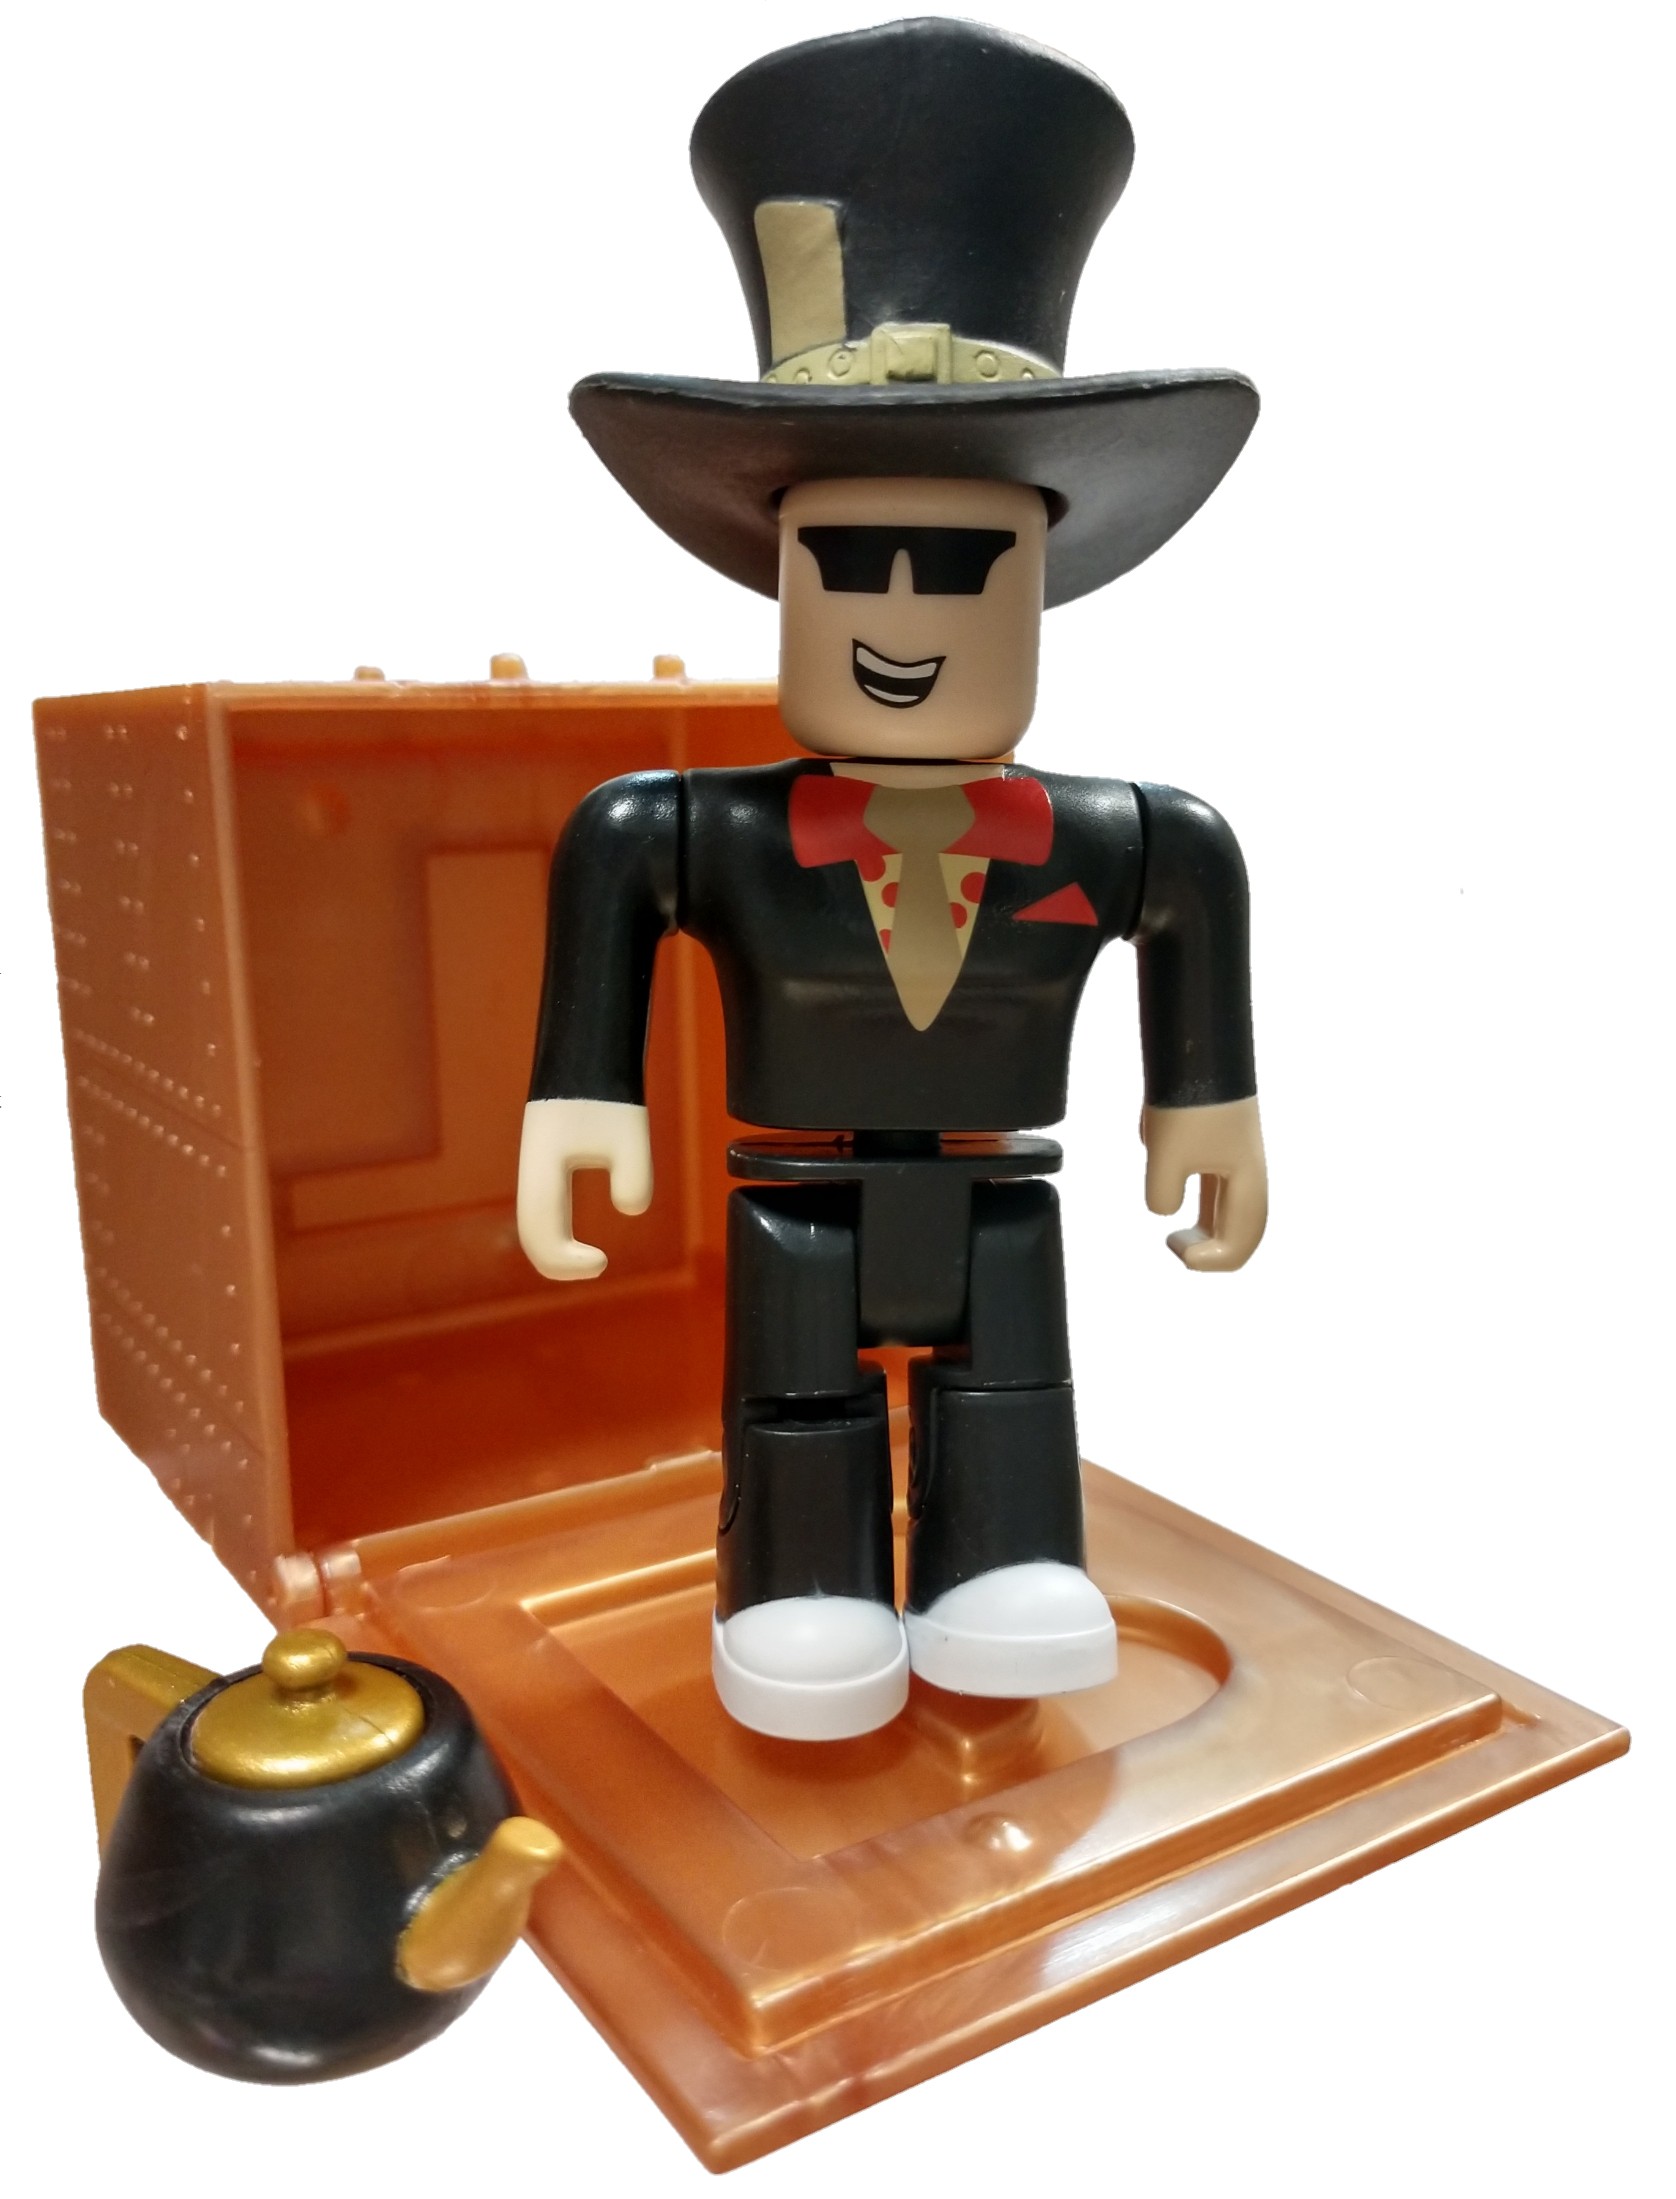 Roblox Series 8 Crazyman32 3 Inch Mini Figure With Cube And Online Code Loose 609411478509 Ebay - roblox figures series 8